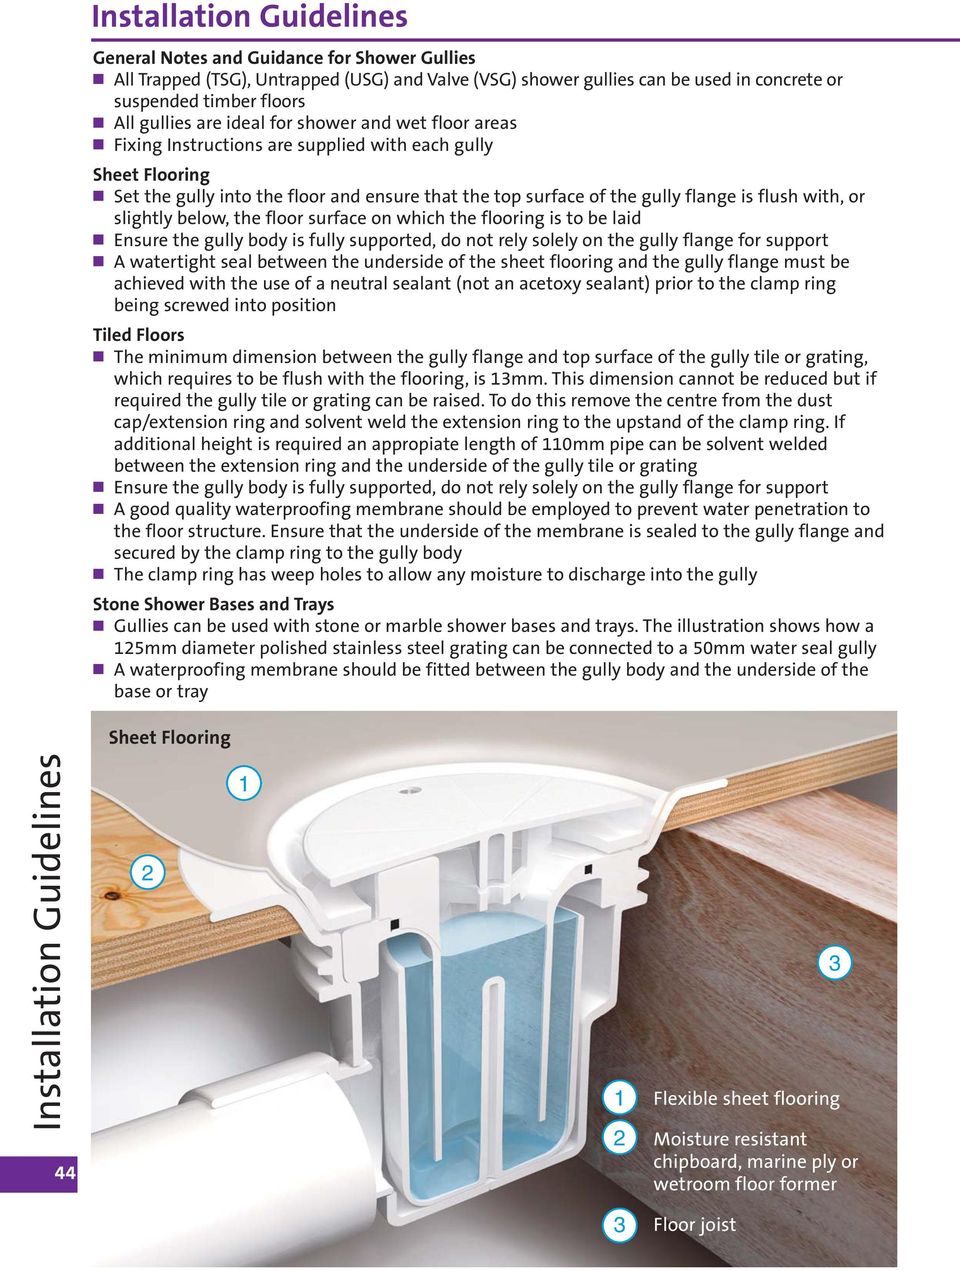 with, or slightly below, the floor surface on which the flooring is to be laid Ensure the gully body is fully supported, do not rely solely on the gully flange for support A watertight seal between